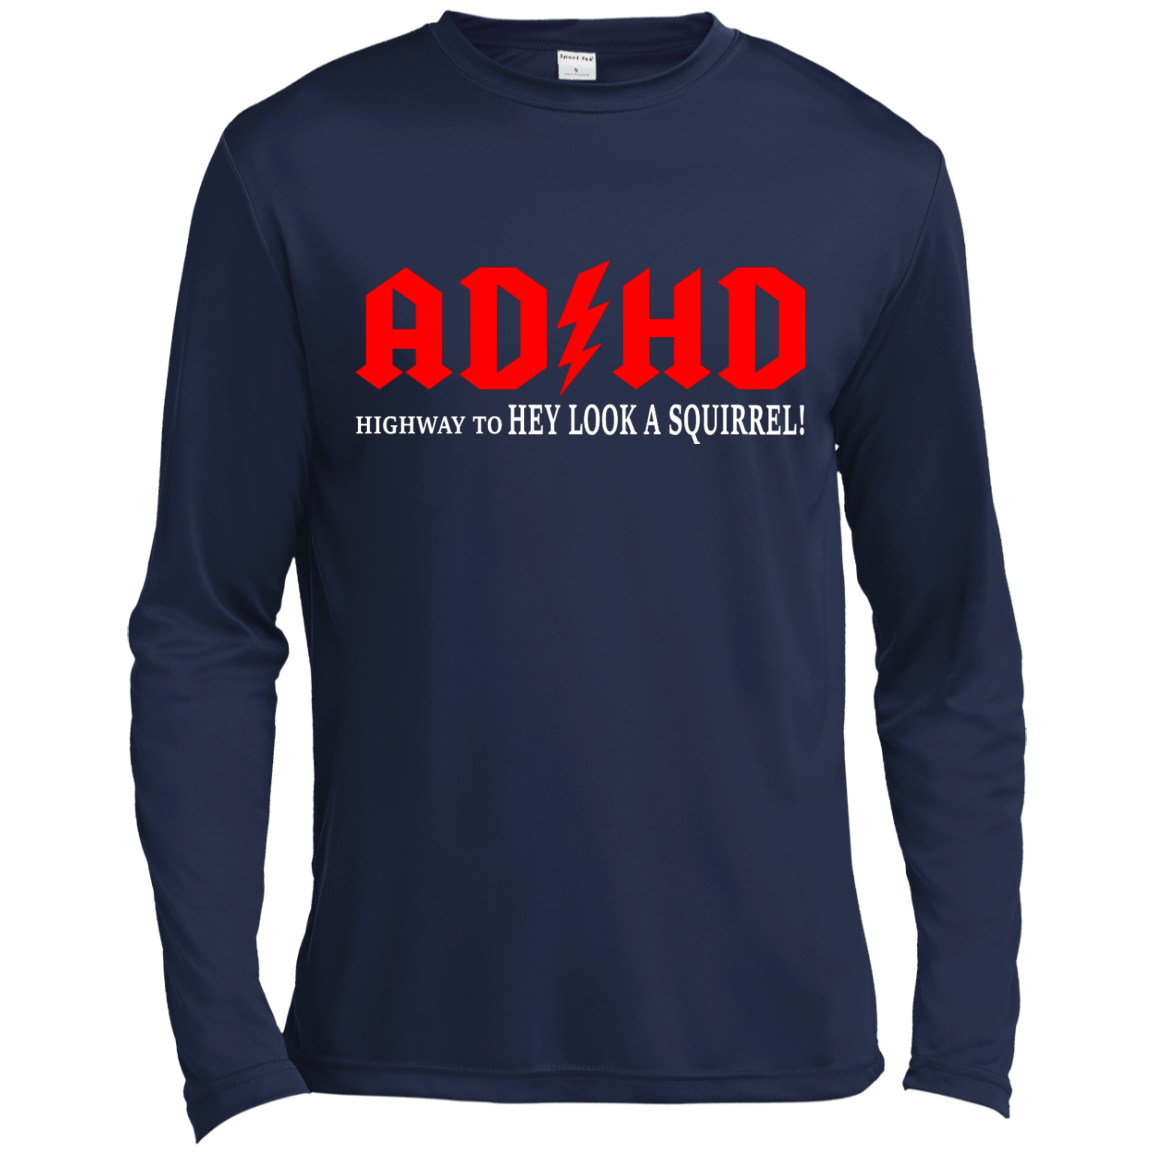 Ad Hd Highway To Hey Look A Squirrel Shirt, Hoodie, Tank - Shirt, Transparent background PNG HD thumbnail